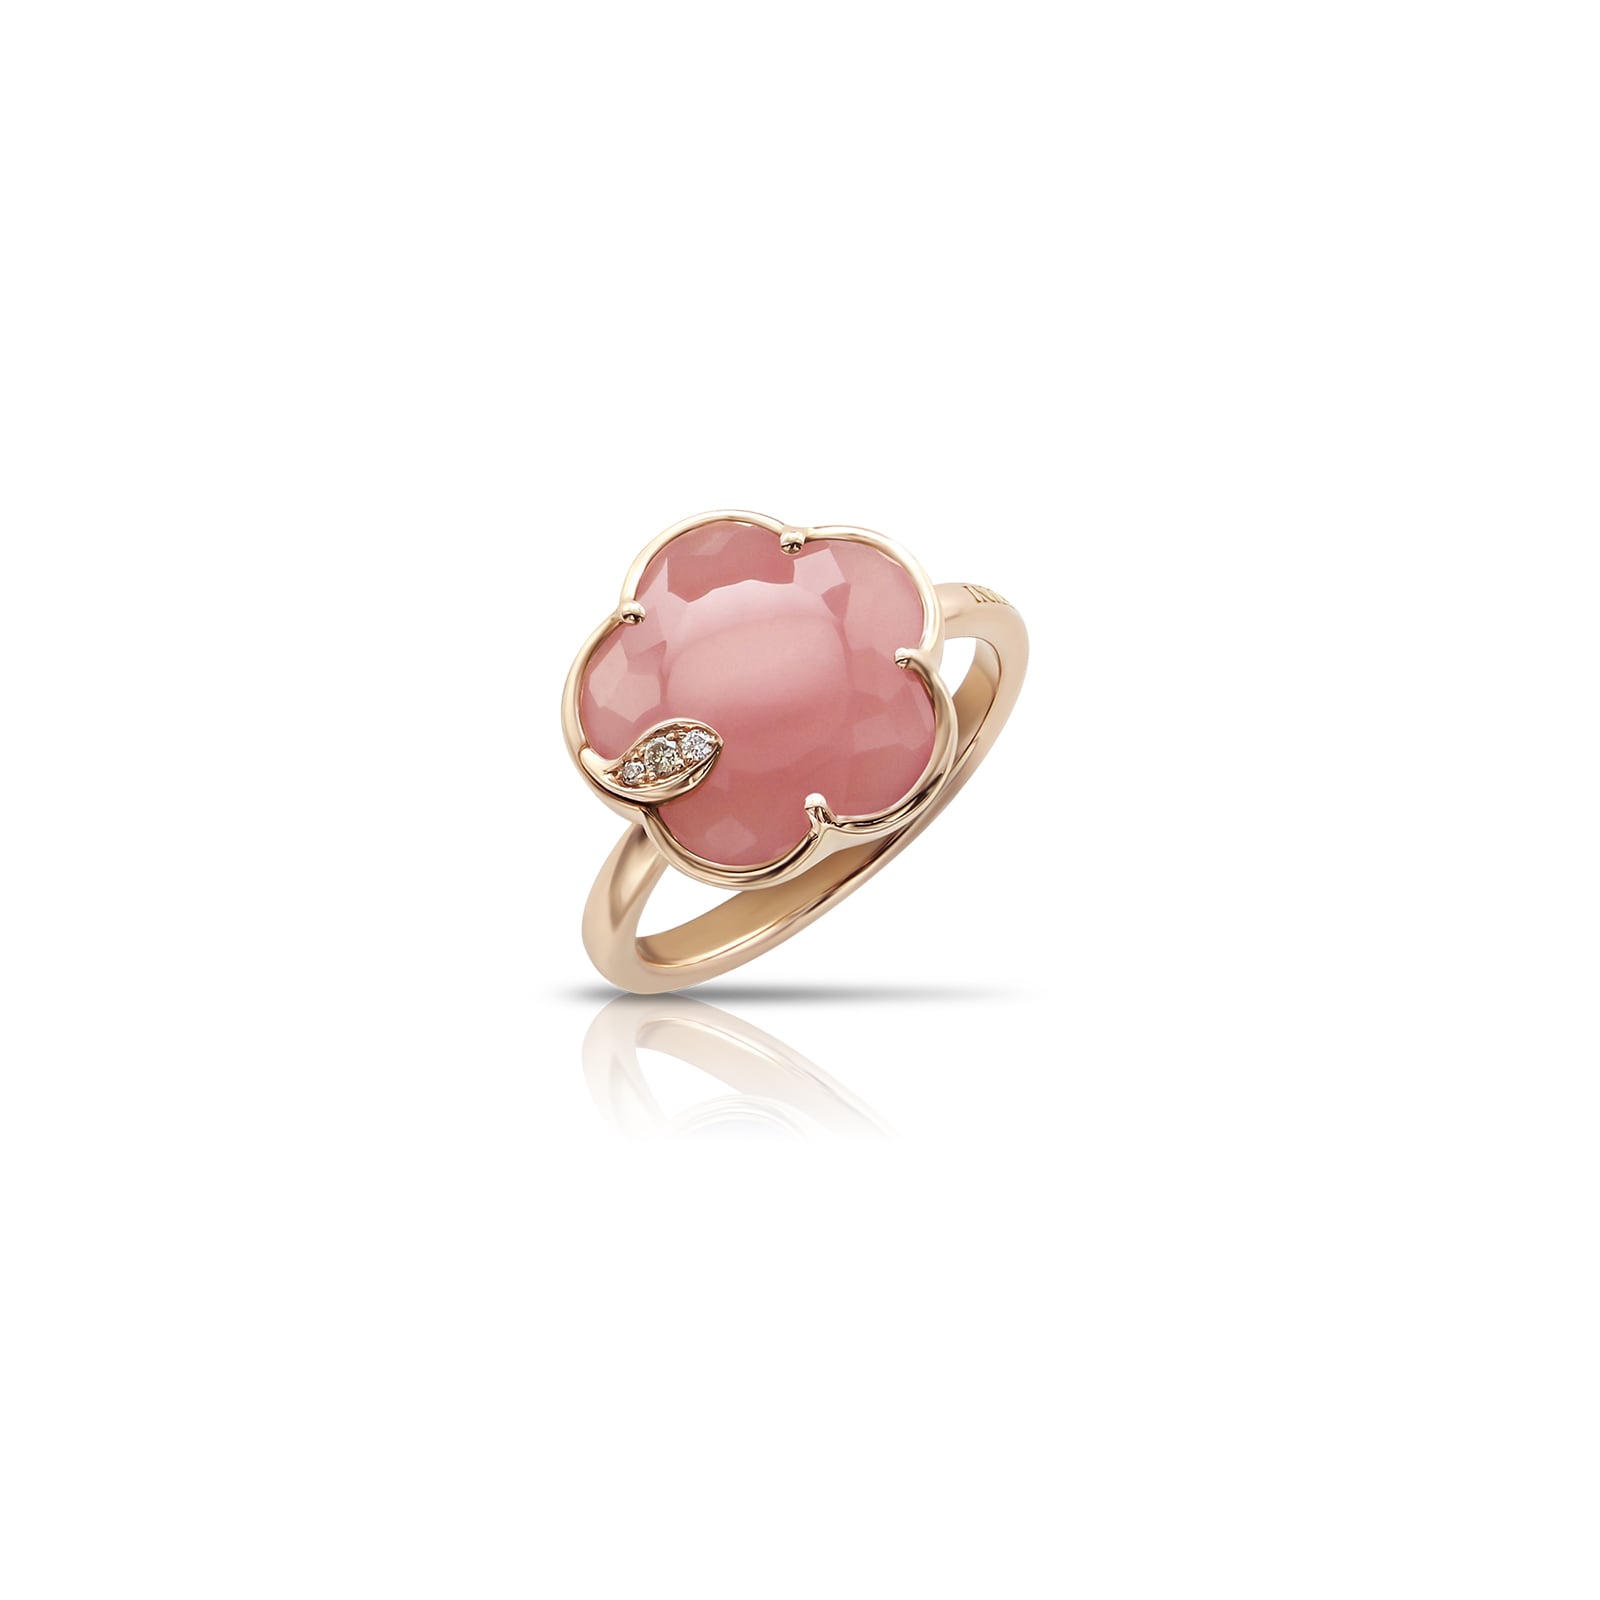 Petit Joli Ring in 18ct Rose Gold with Pink Chalcedony and Diamonds - Ring Size O